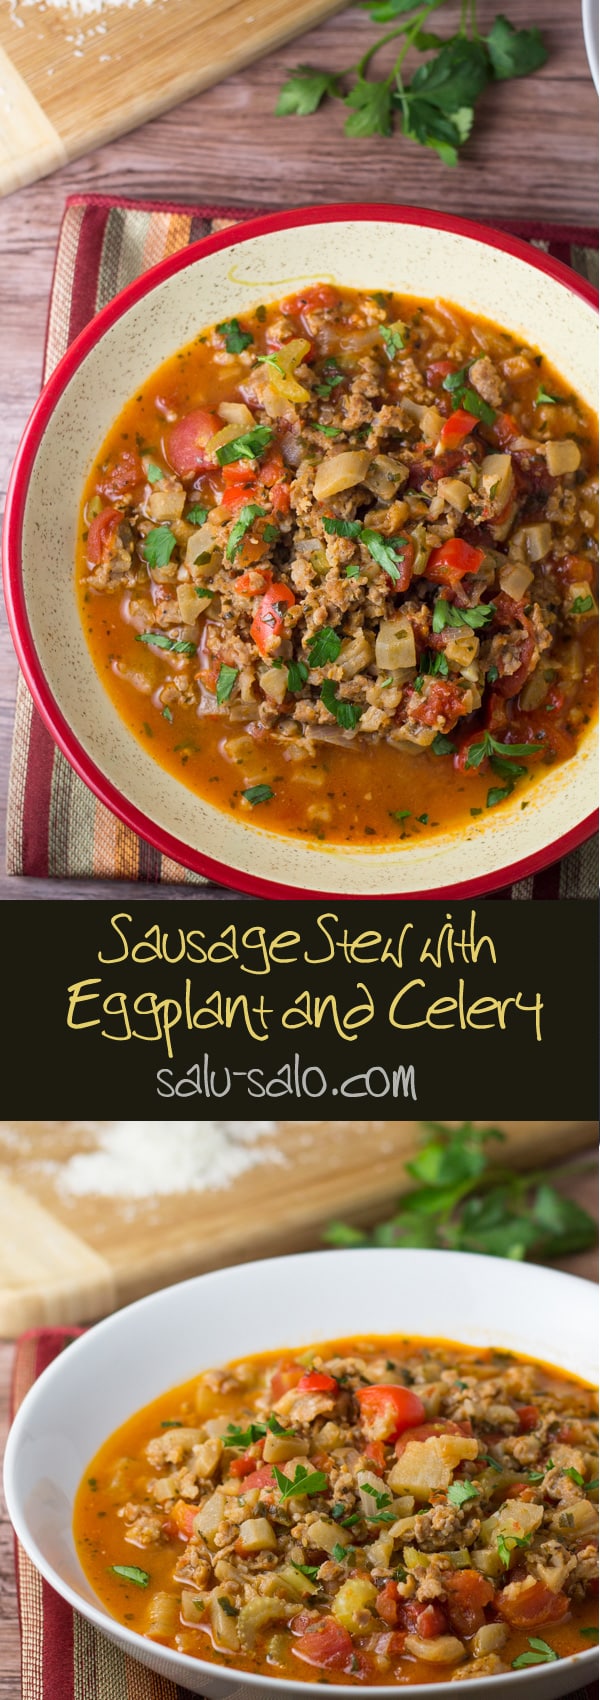 Sausage Stew with Eggplant and Celery